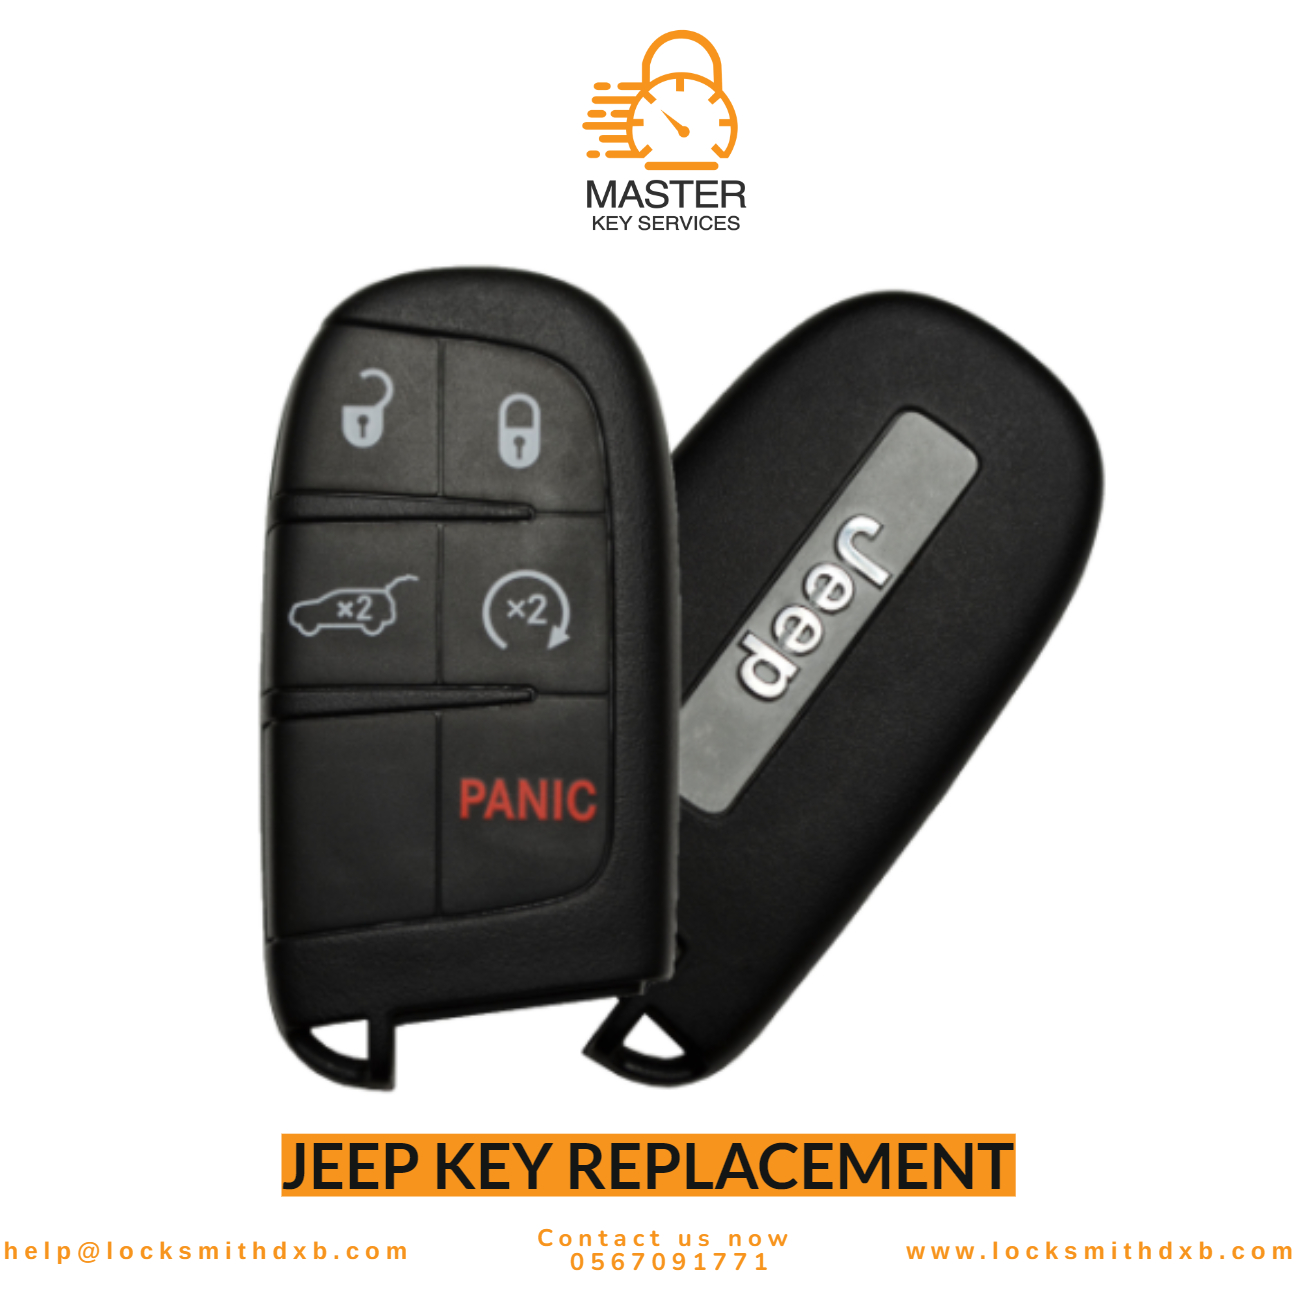 Jeep key replacement